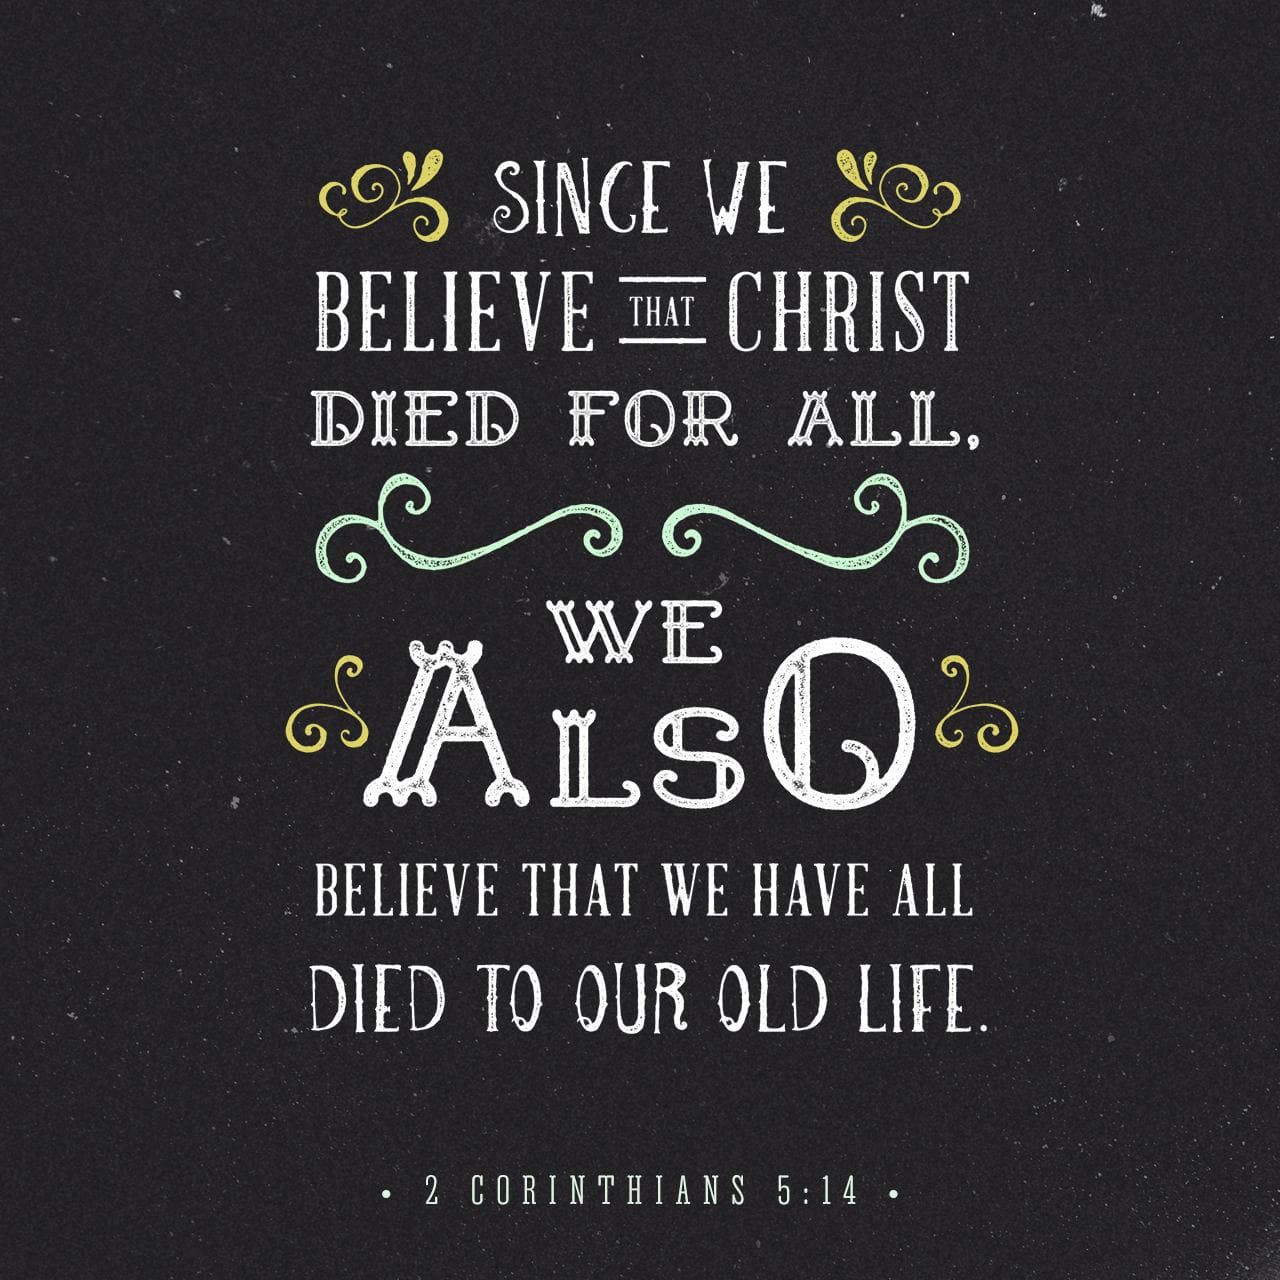 Bible Verse of the Day - day 155 - image 474 (2 Corinthians 5:14-21)